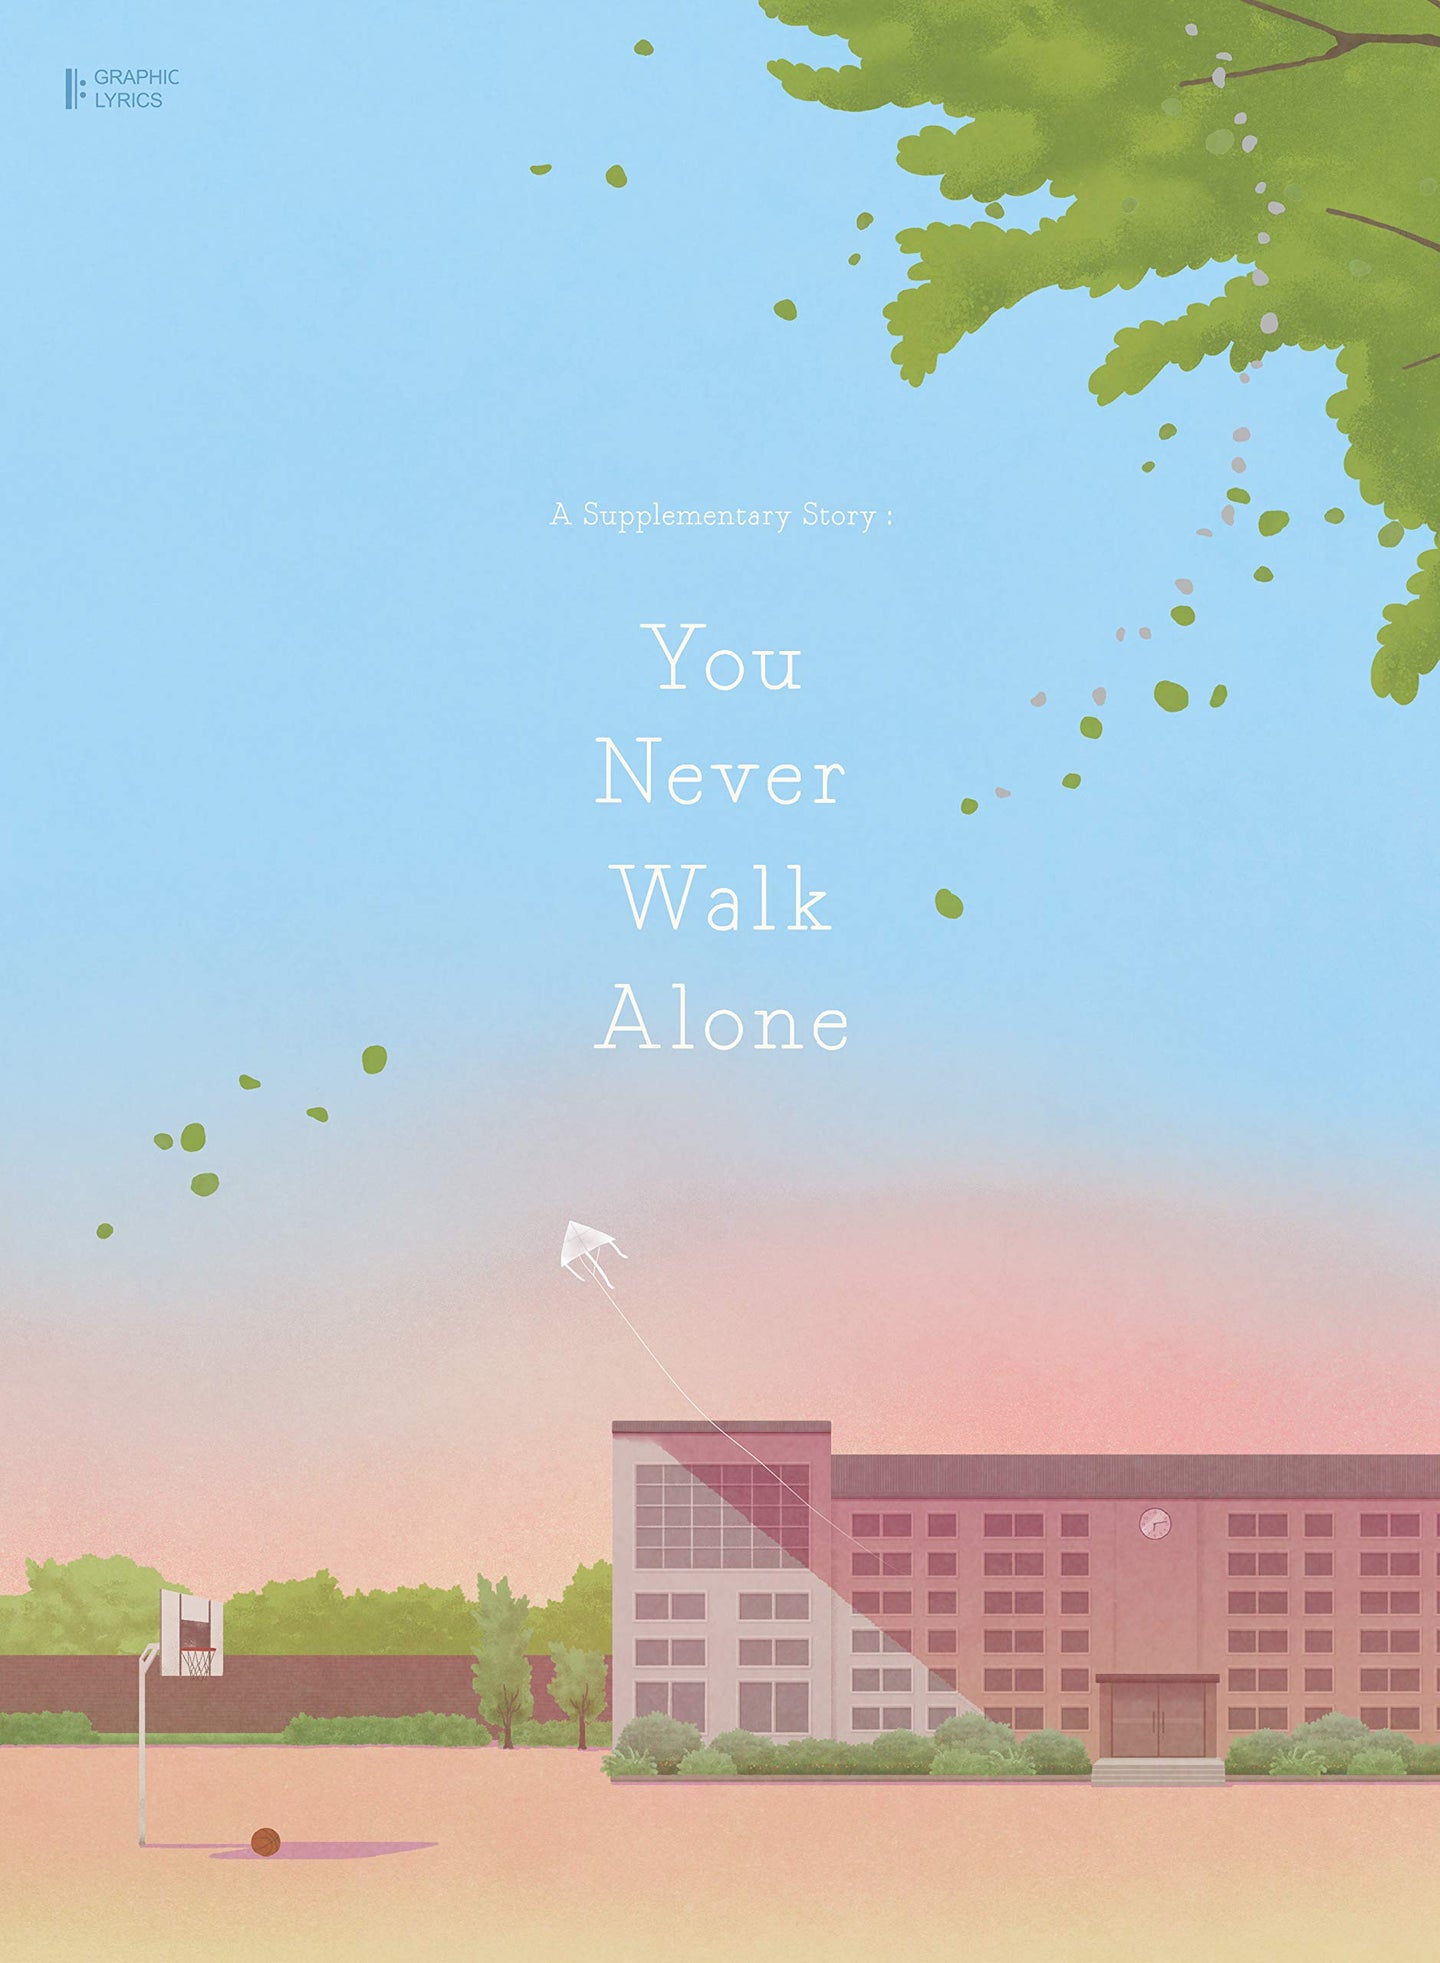 BTS GRAPHIC LYRICS Vol. 1 - A Supplementary Story : You Never Walk Alone